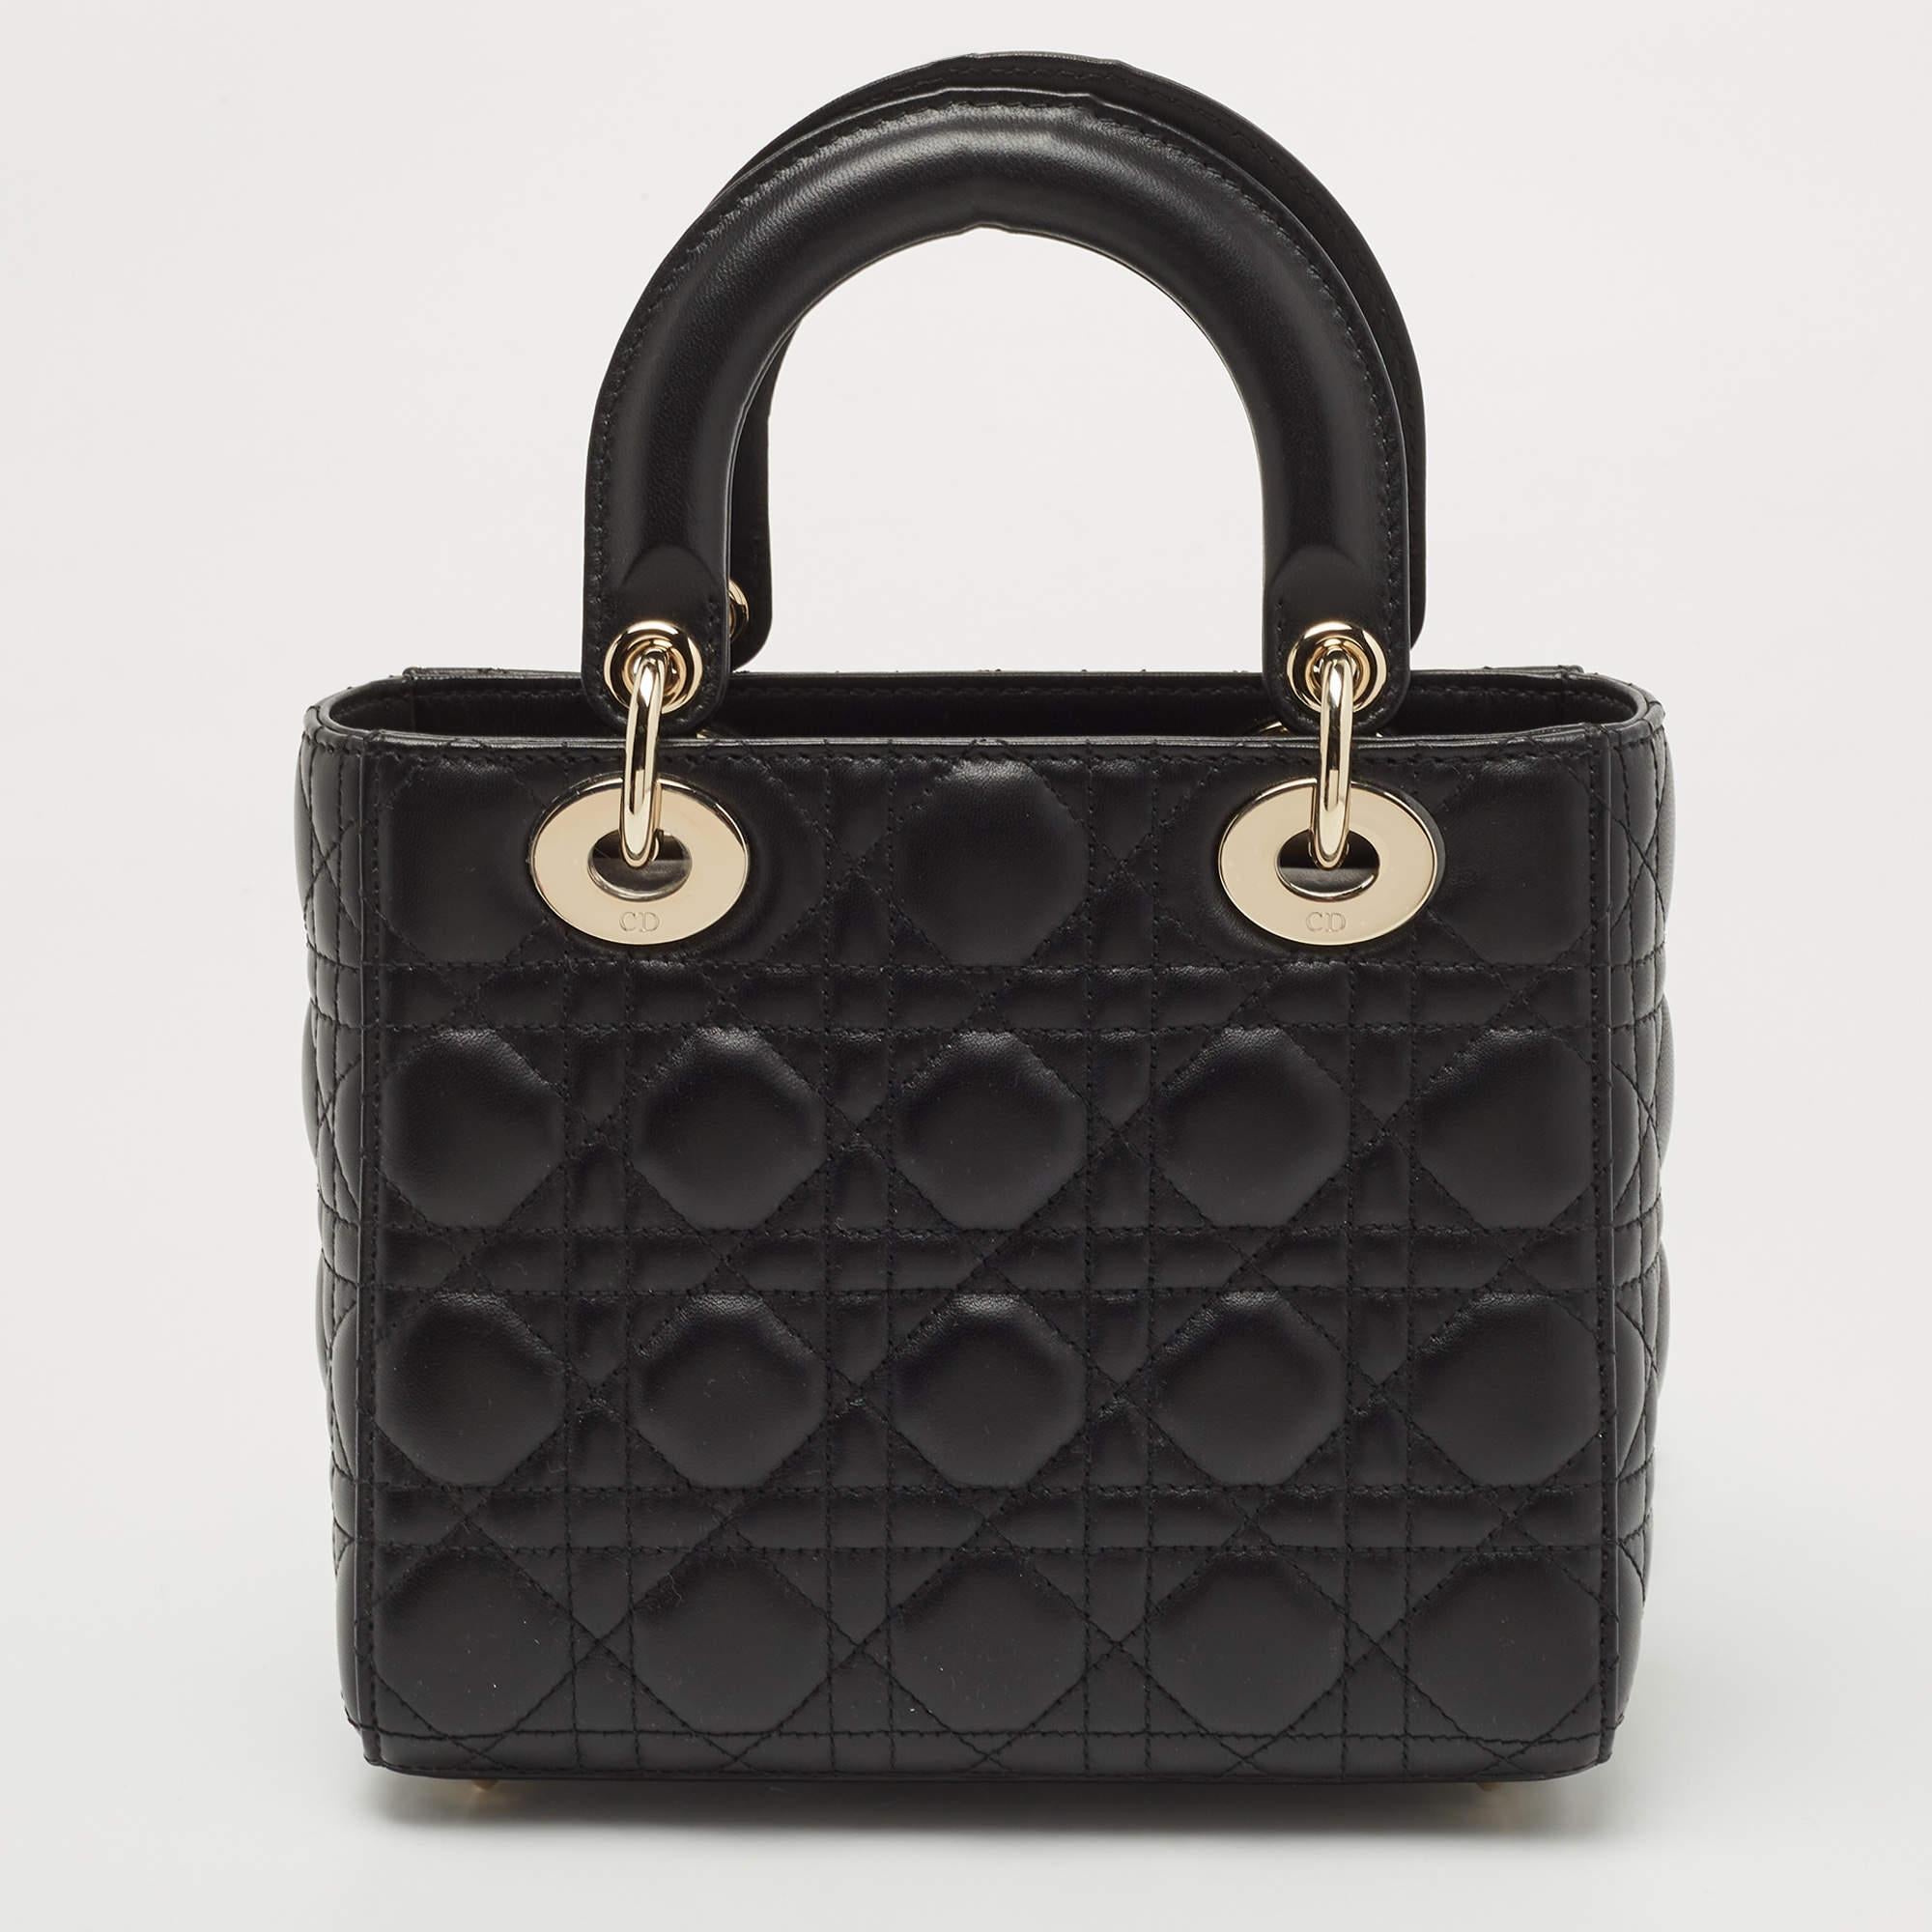 A timeless status and great design mark the Lady Dior bag. It is an iconic bag that people continue to invest into this day. We have here this classic beauty crafted from Cannage leather. The bag has a lined interior for your essentials. This micro